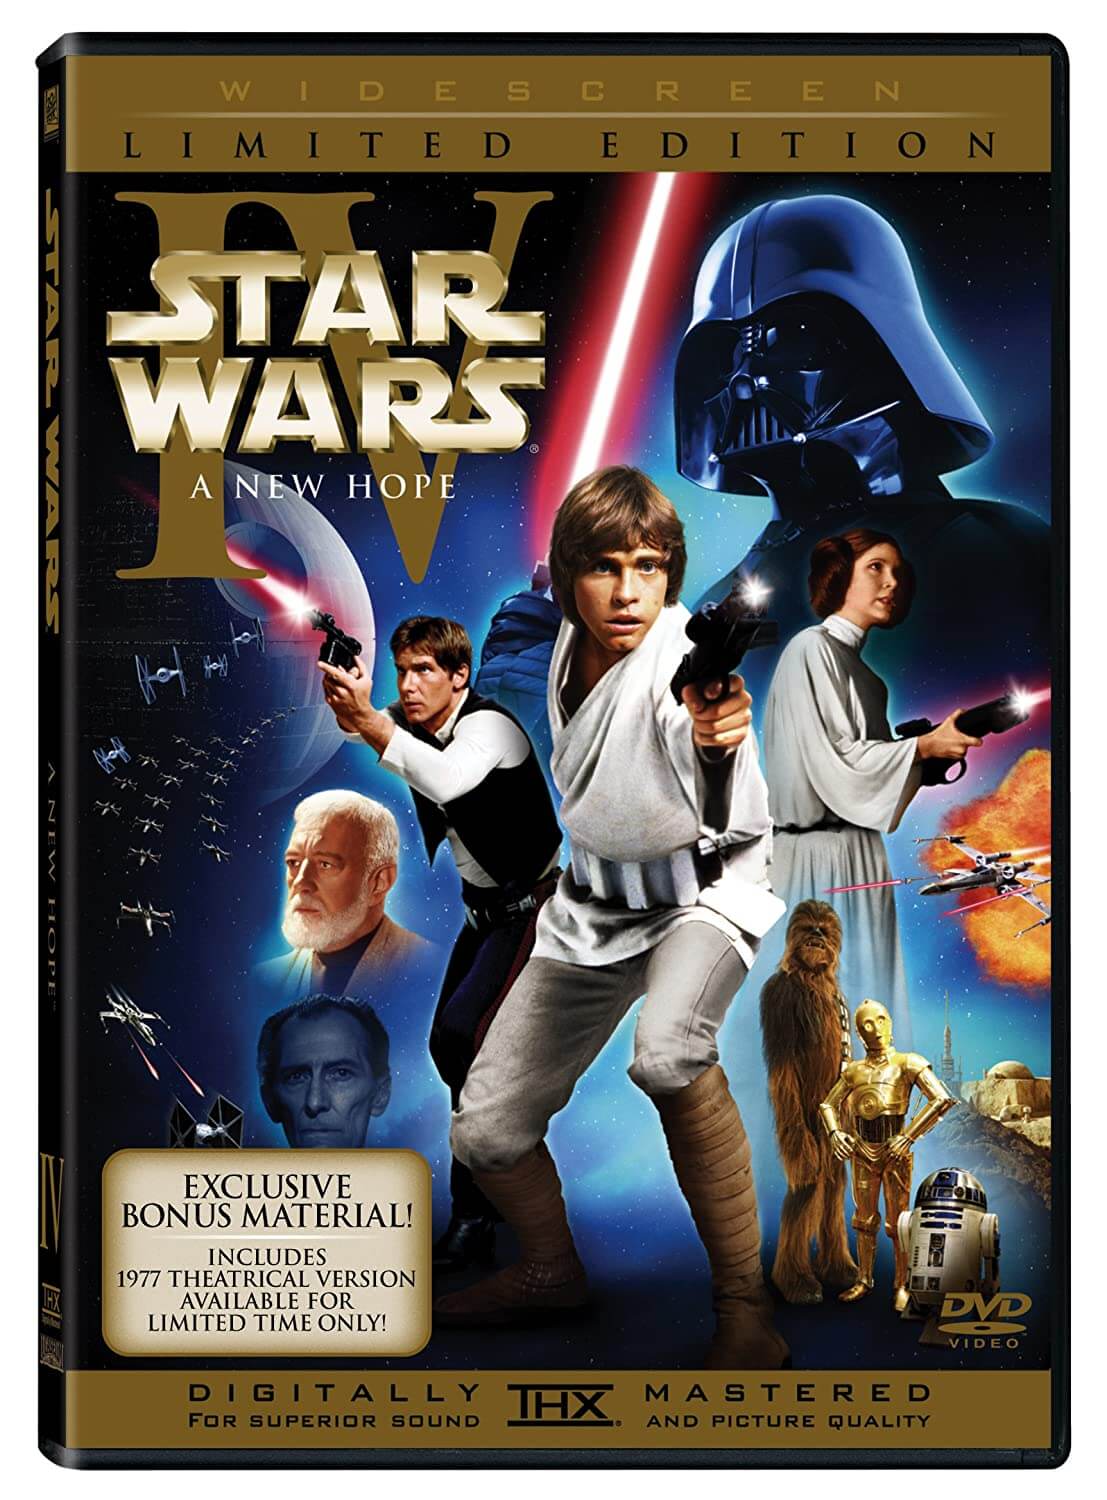 Star Wars Original Theatrical Release A New Hope DVD